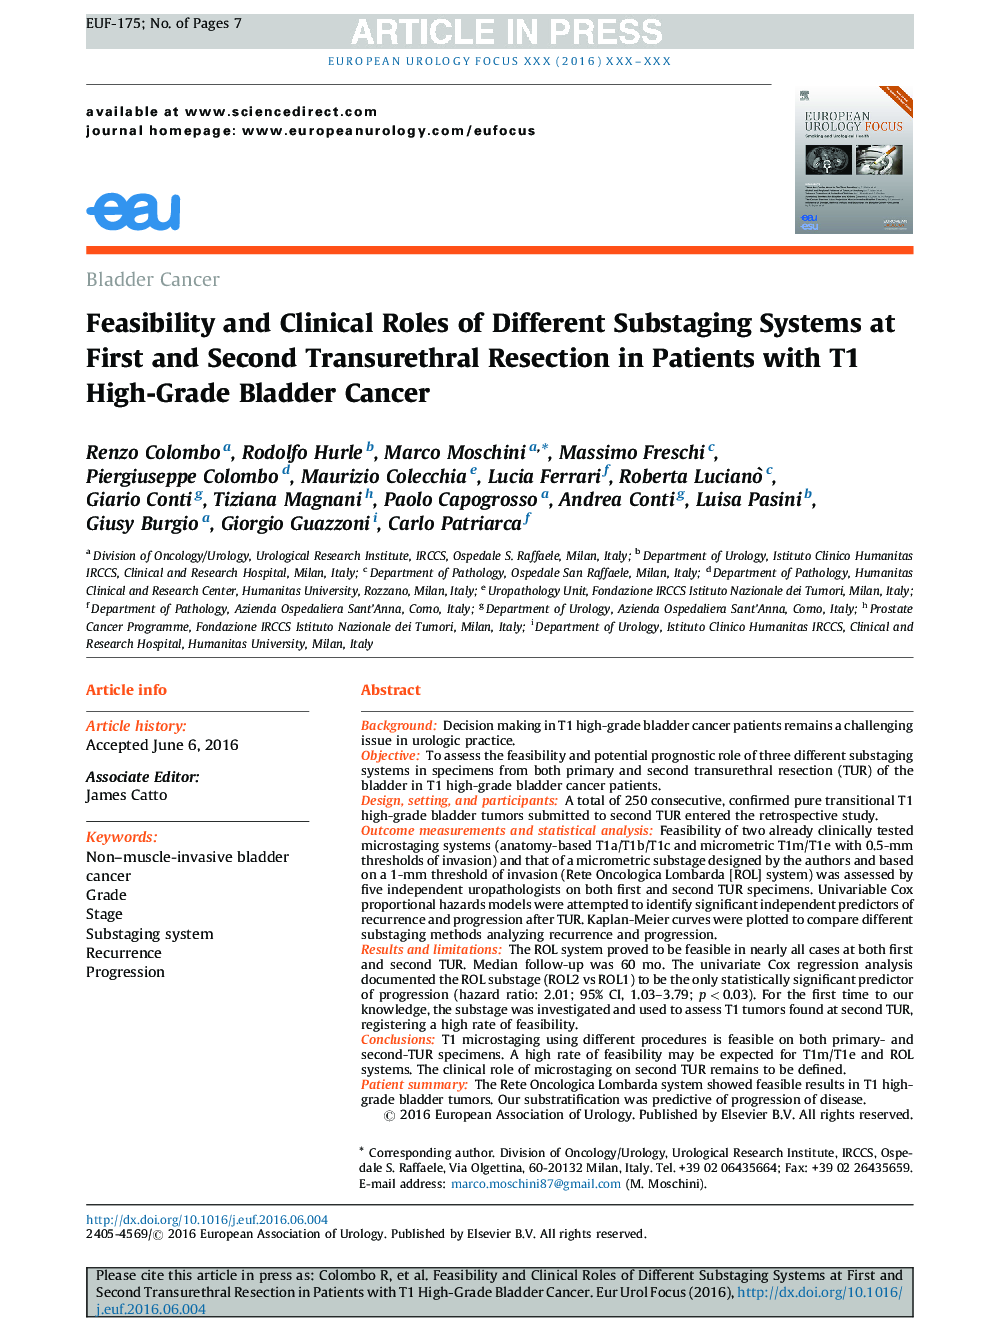 Feasibility and Clinical Roles of Different Substaging Systems at First and Second Transurethral Resection in Patients with T1 High-Grade Bladder Cancer